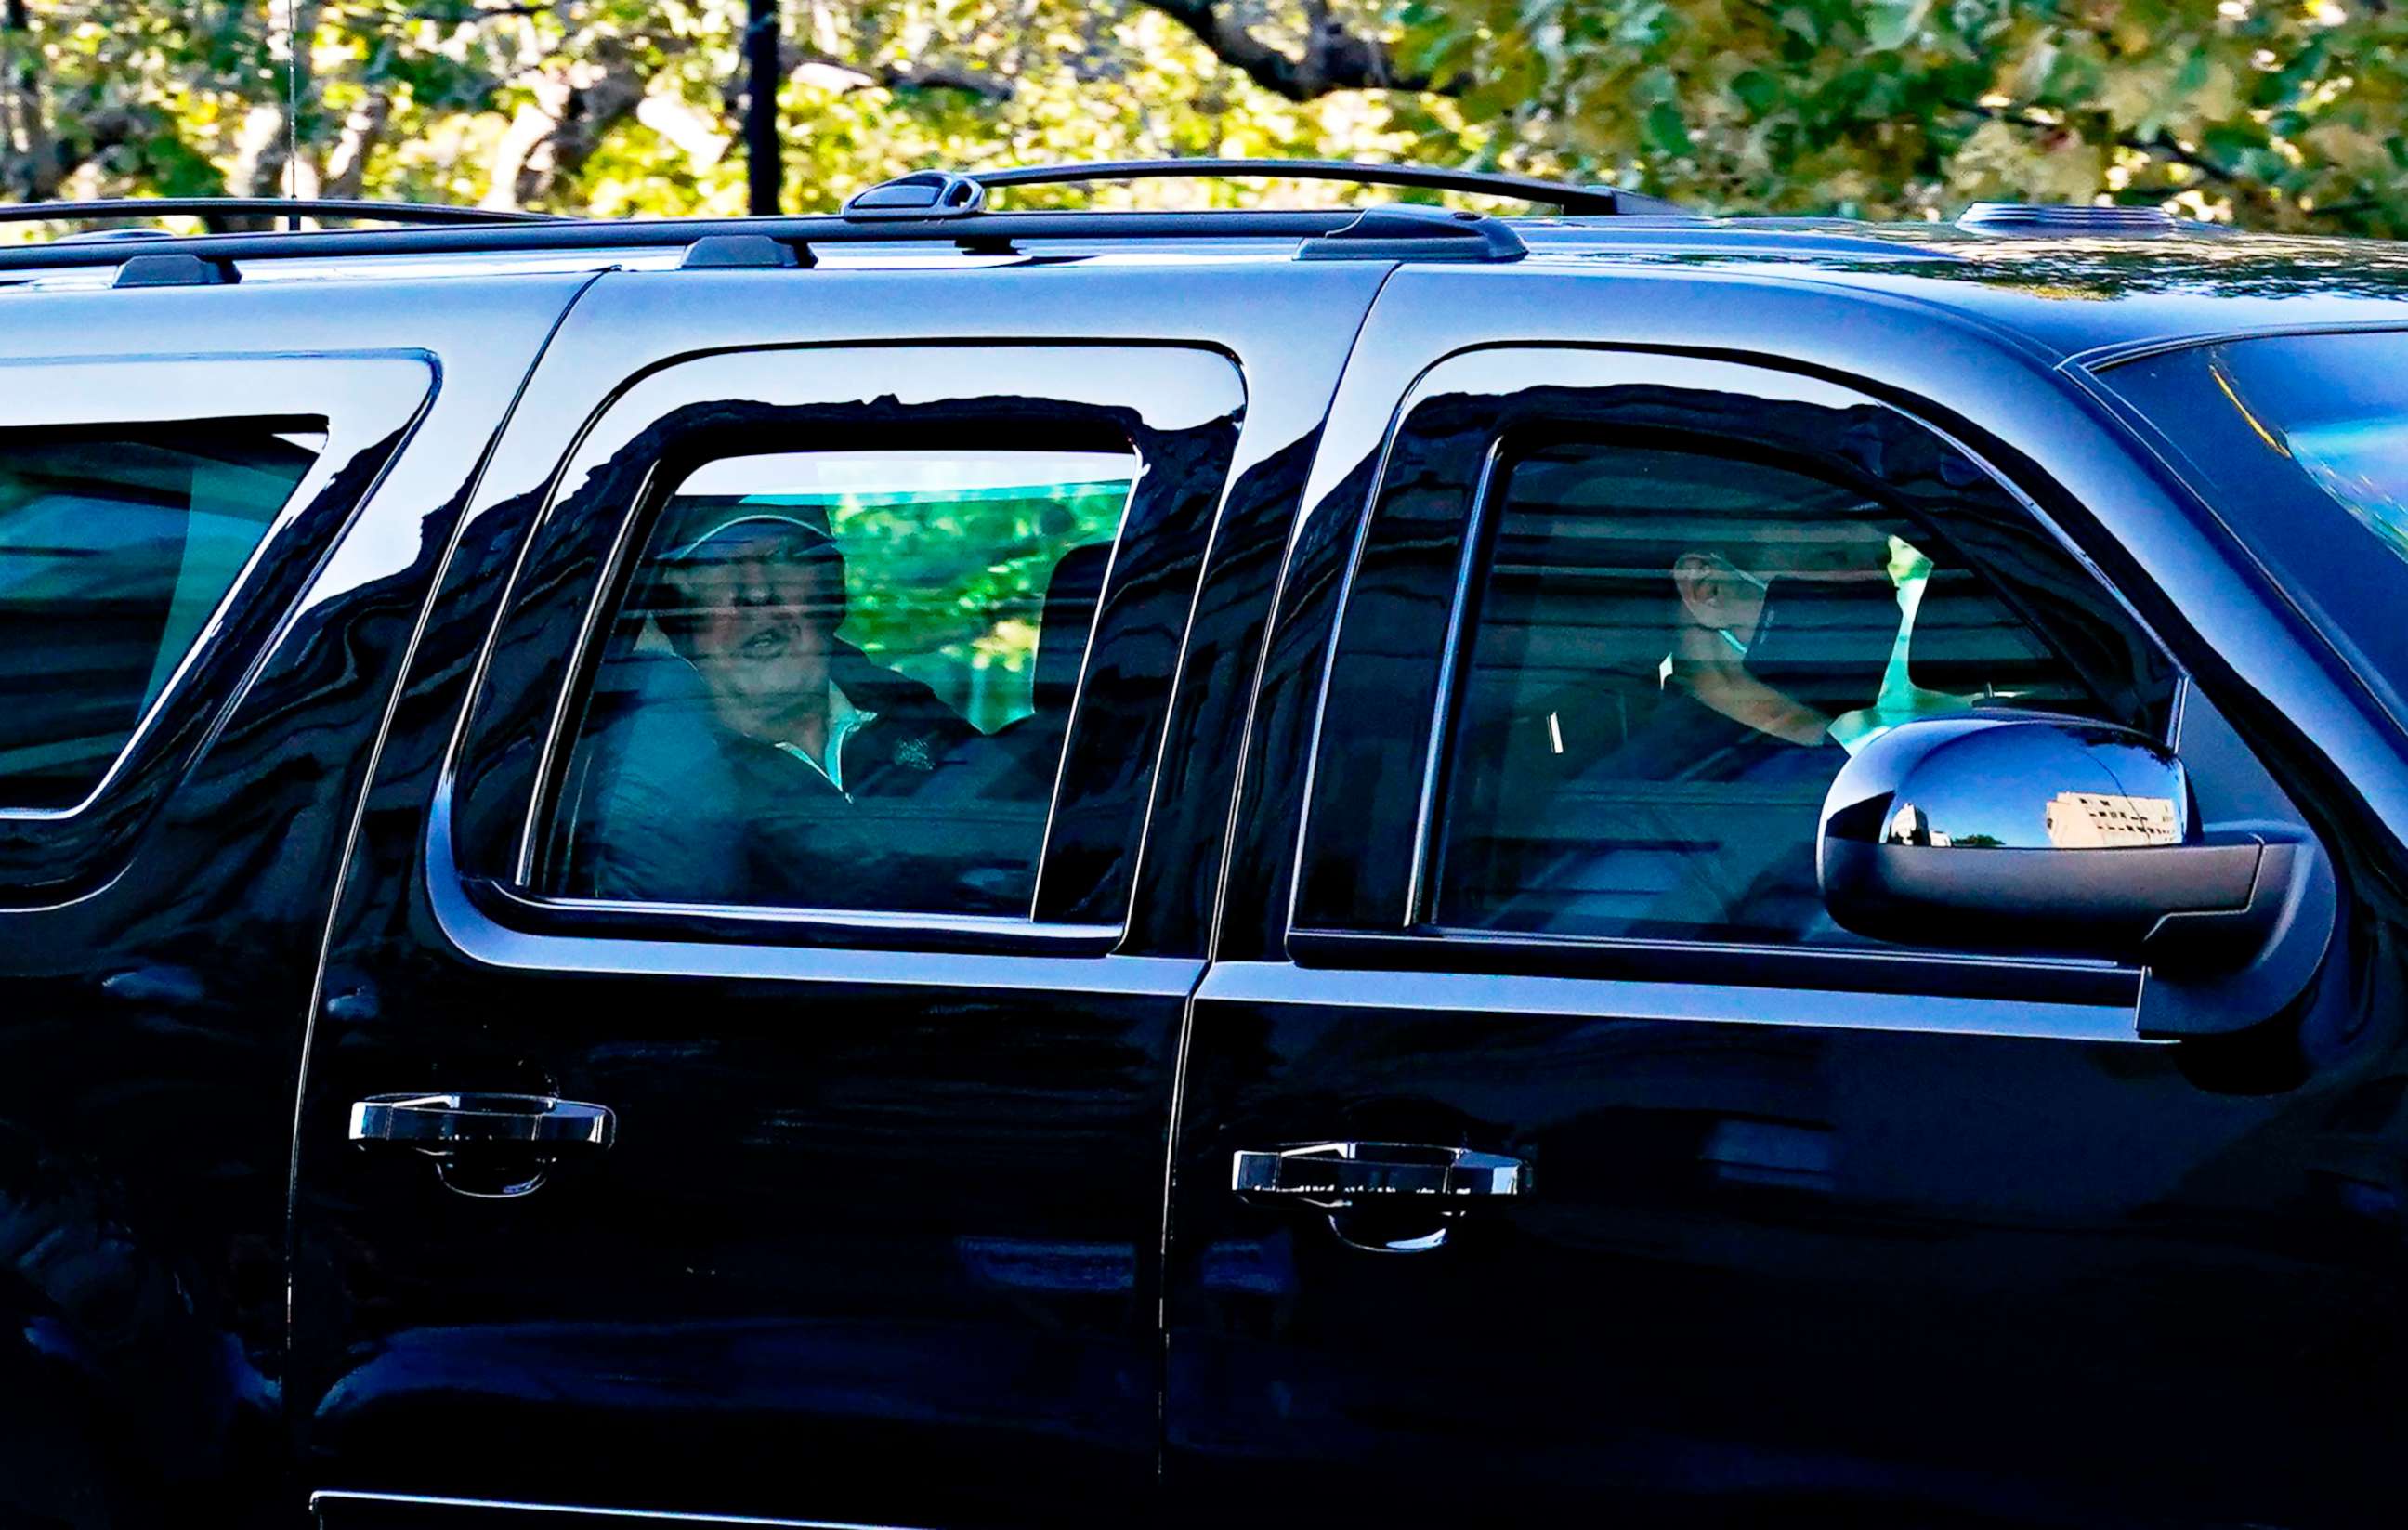 PHOTO: President Donald Trump watches from his limousine as he returns from playing golf to the White House in Washington on Nov. 7, 2020, following news that Joe Biden was declared the winner of the 2020 Presidential Election by major news organizations.